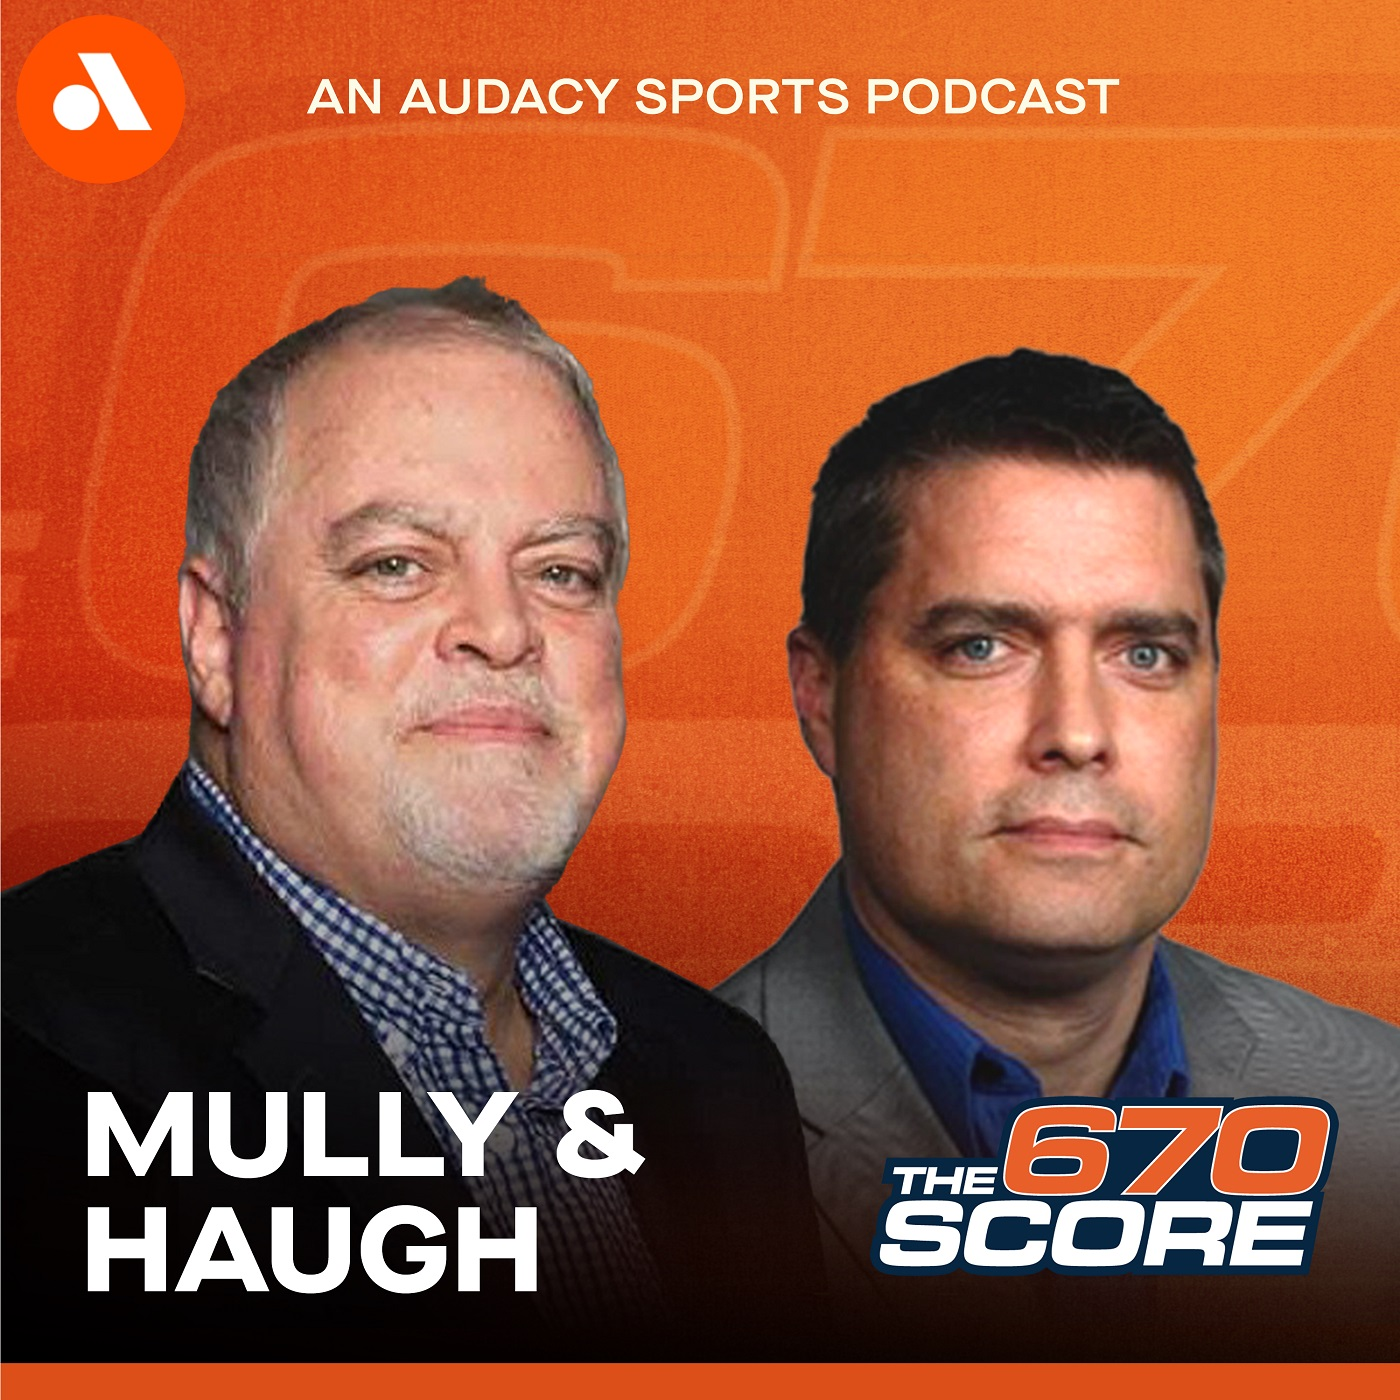 Mully & Haugh: Whom was Willson Contreras talking about? Pick 6 (Hour 2)